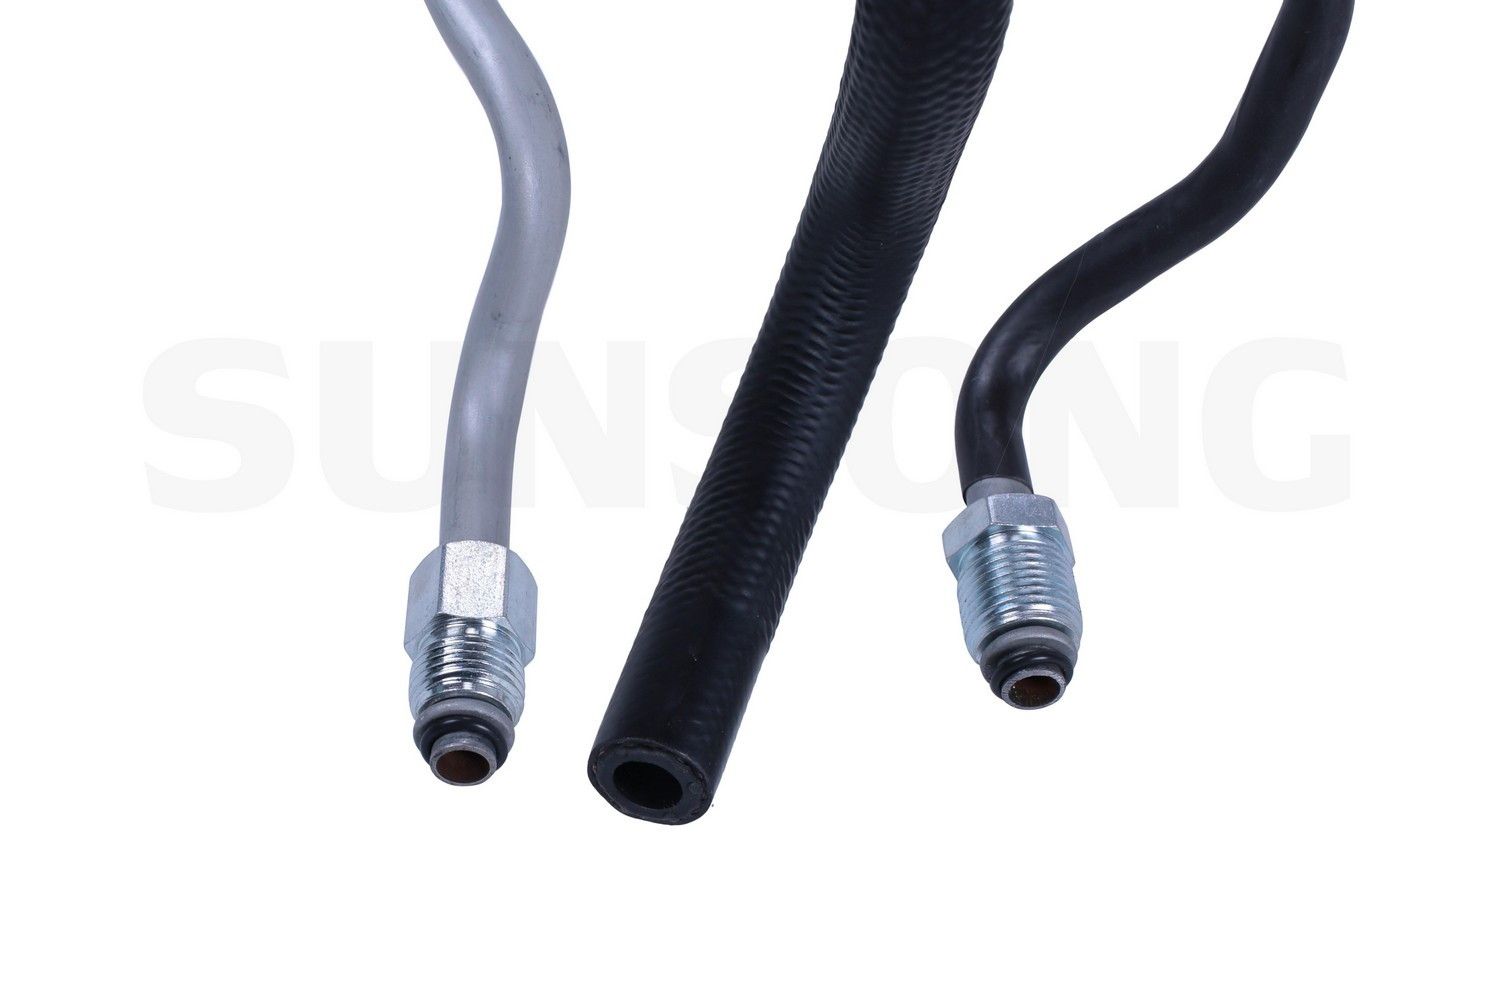 2005 Toyota Tundra Power Steering Hose Assembly Steering - Omega, Sunsong